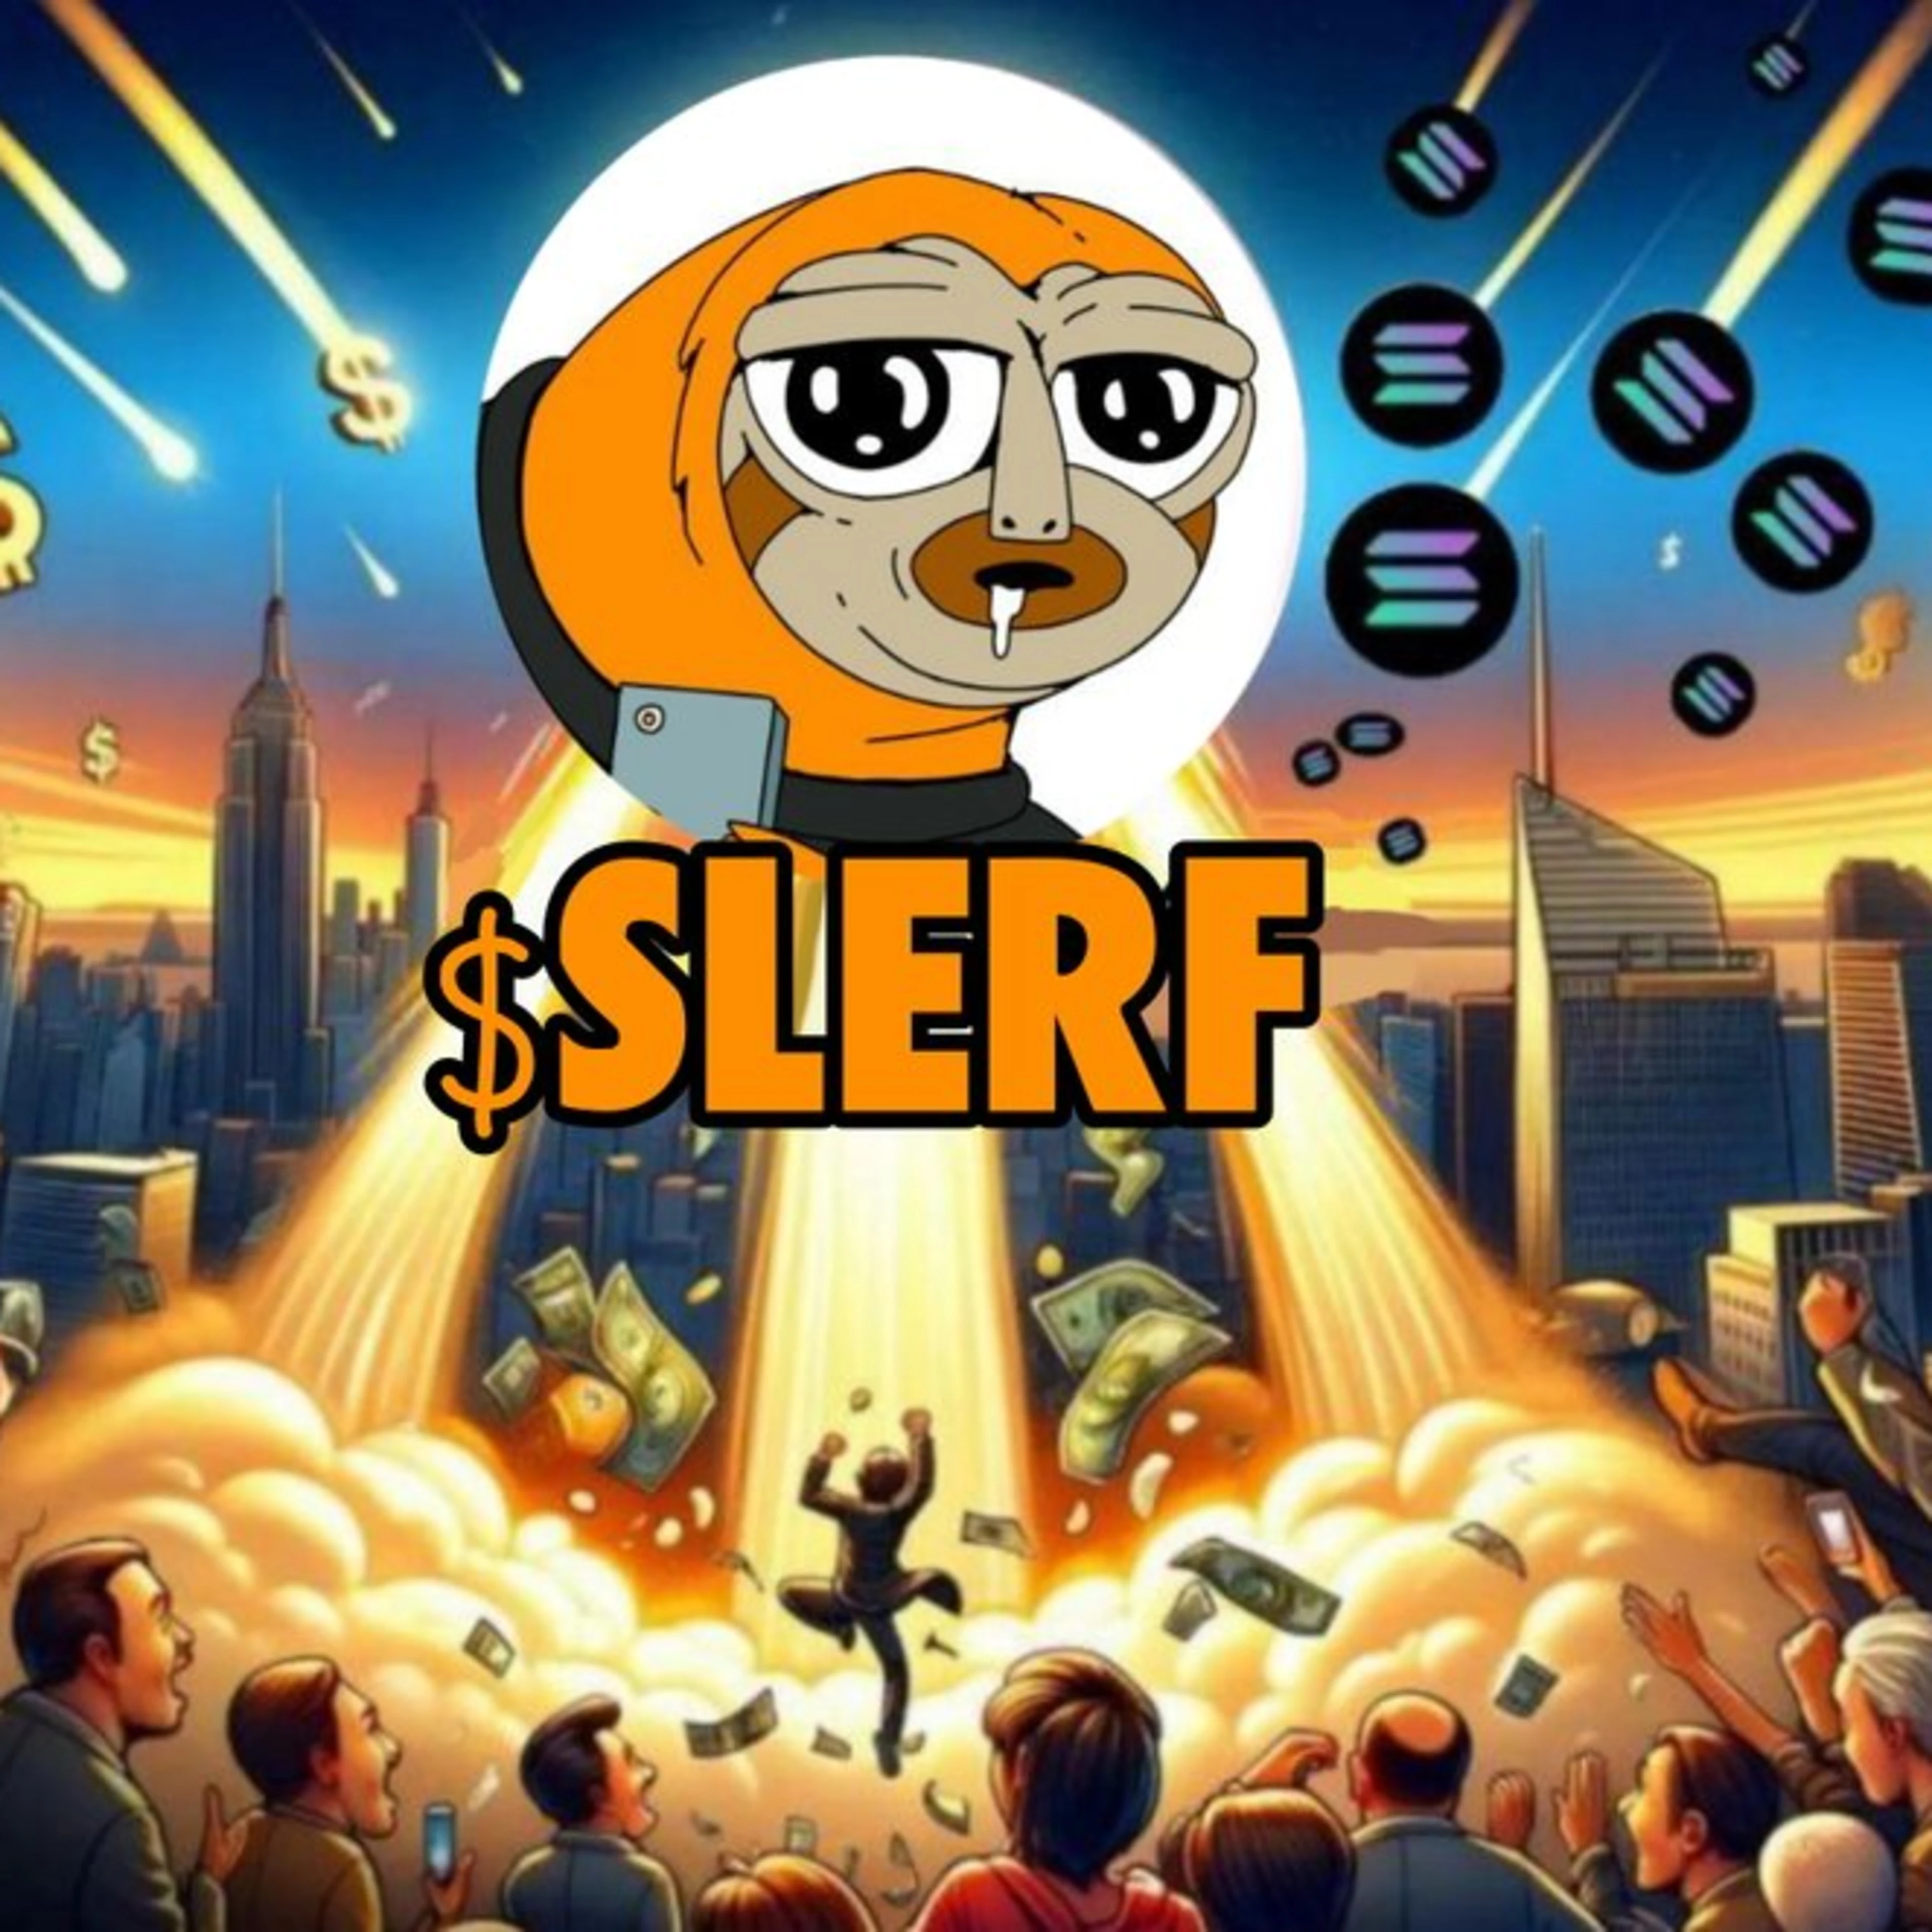 Solana Surges to Fourth Place Amid SLERF Meme Coin Incident